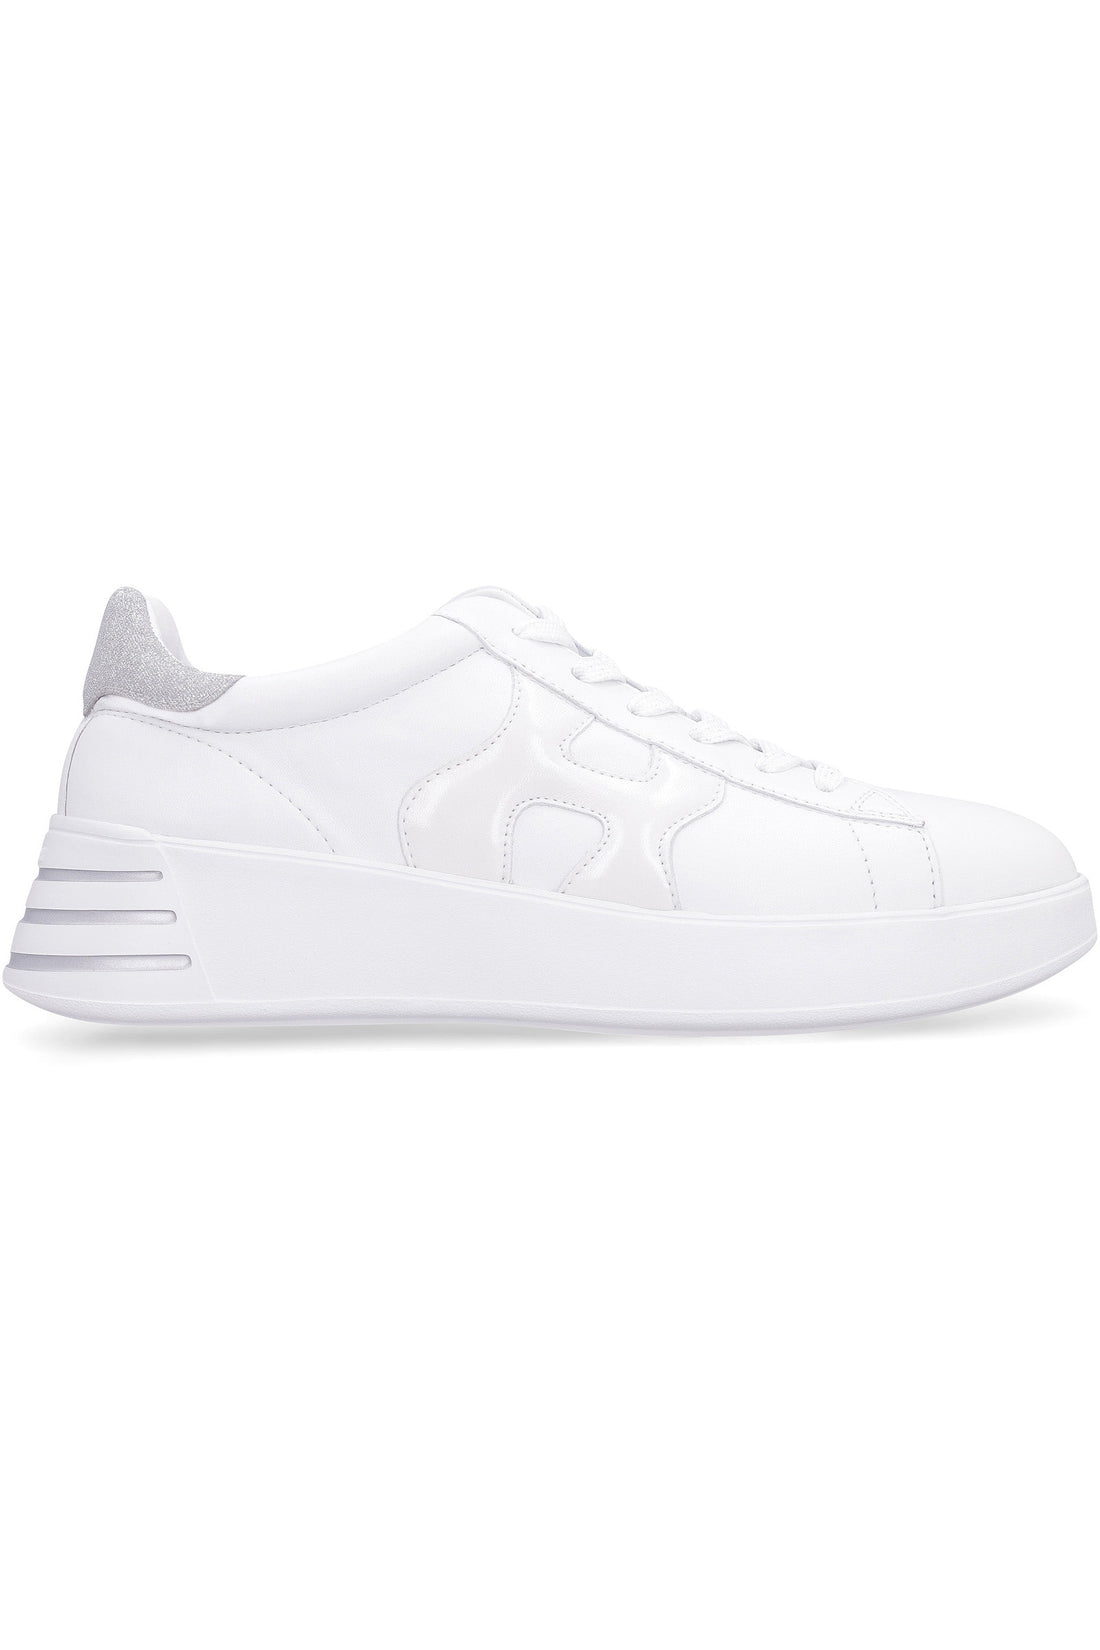 Hogan-OUTLET-SALE-Rebel leather low-top sneakers-ARCHIVIST